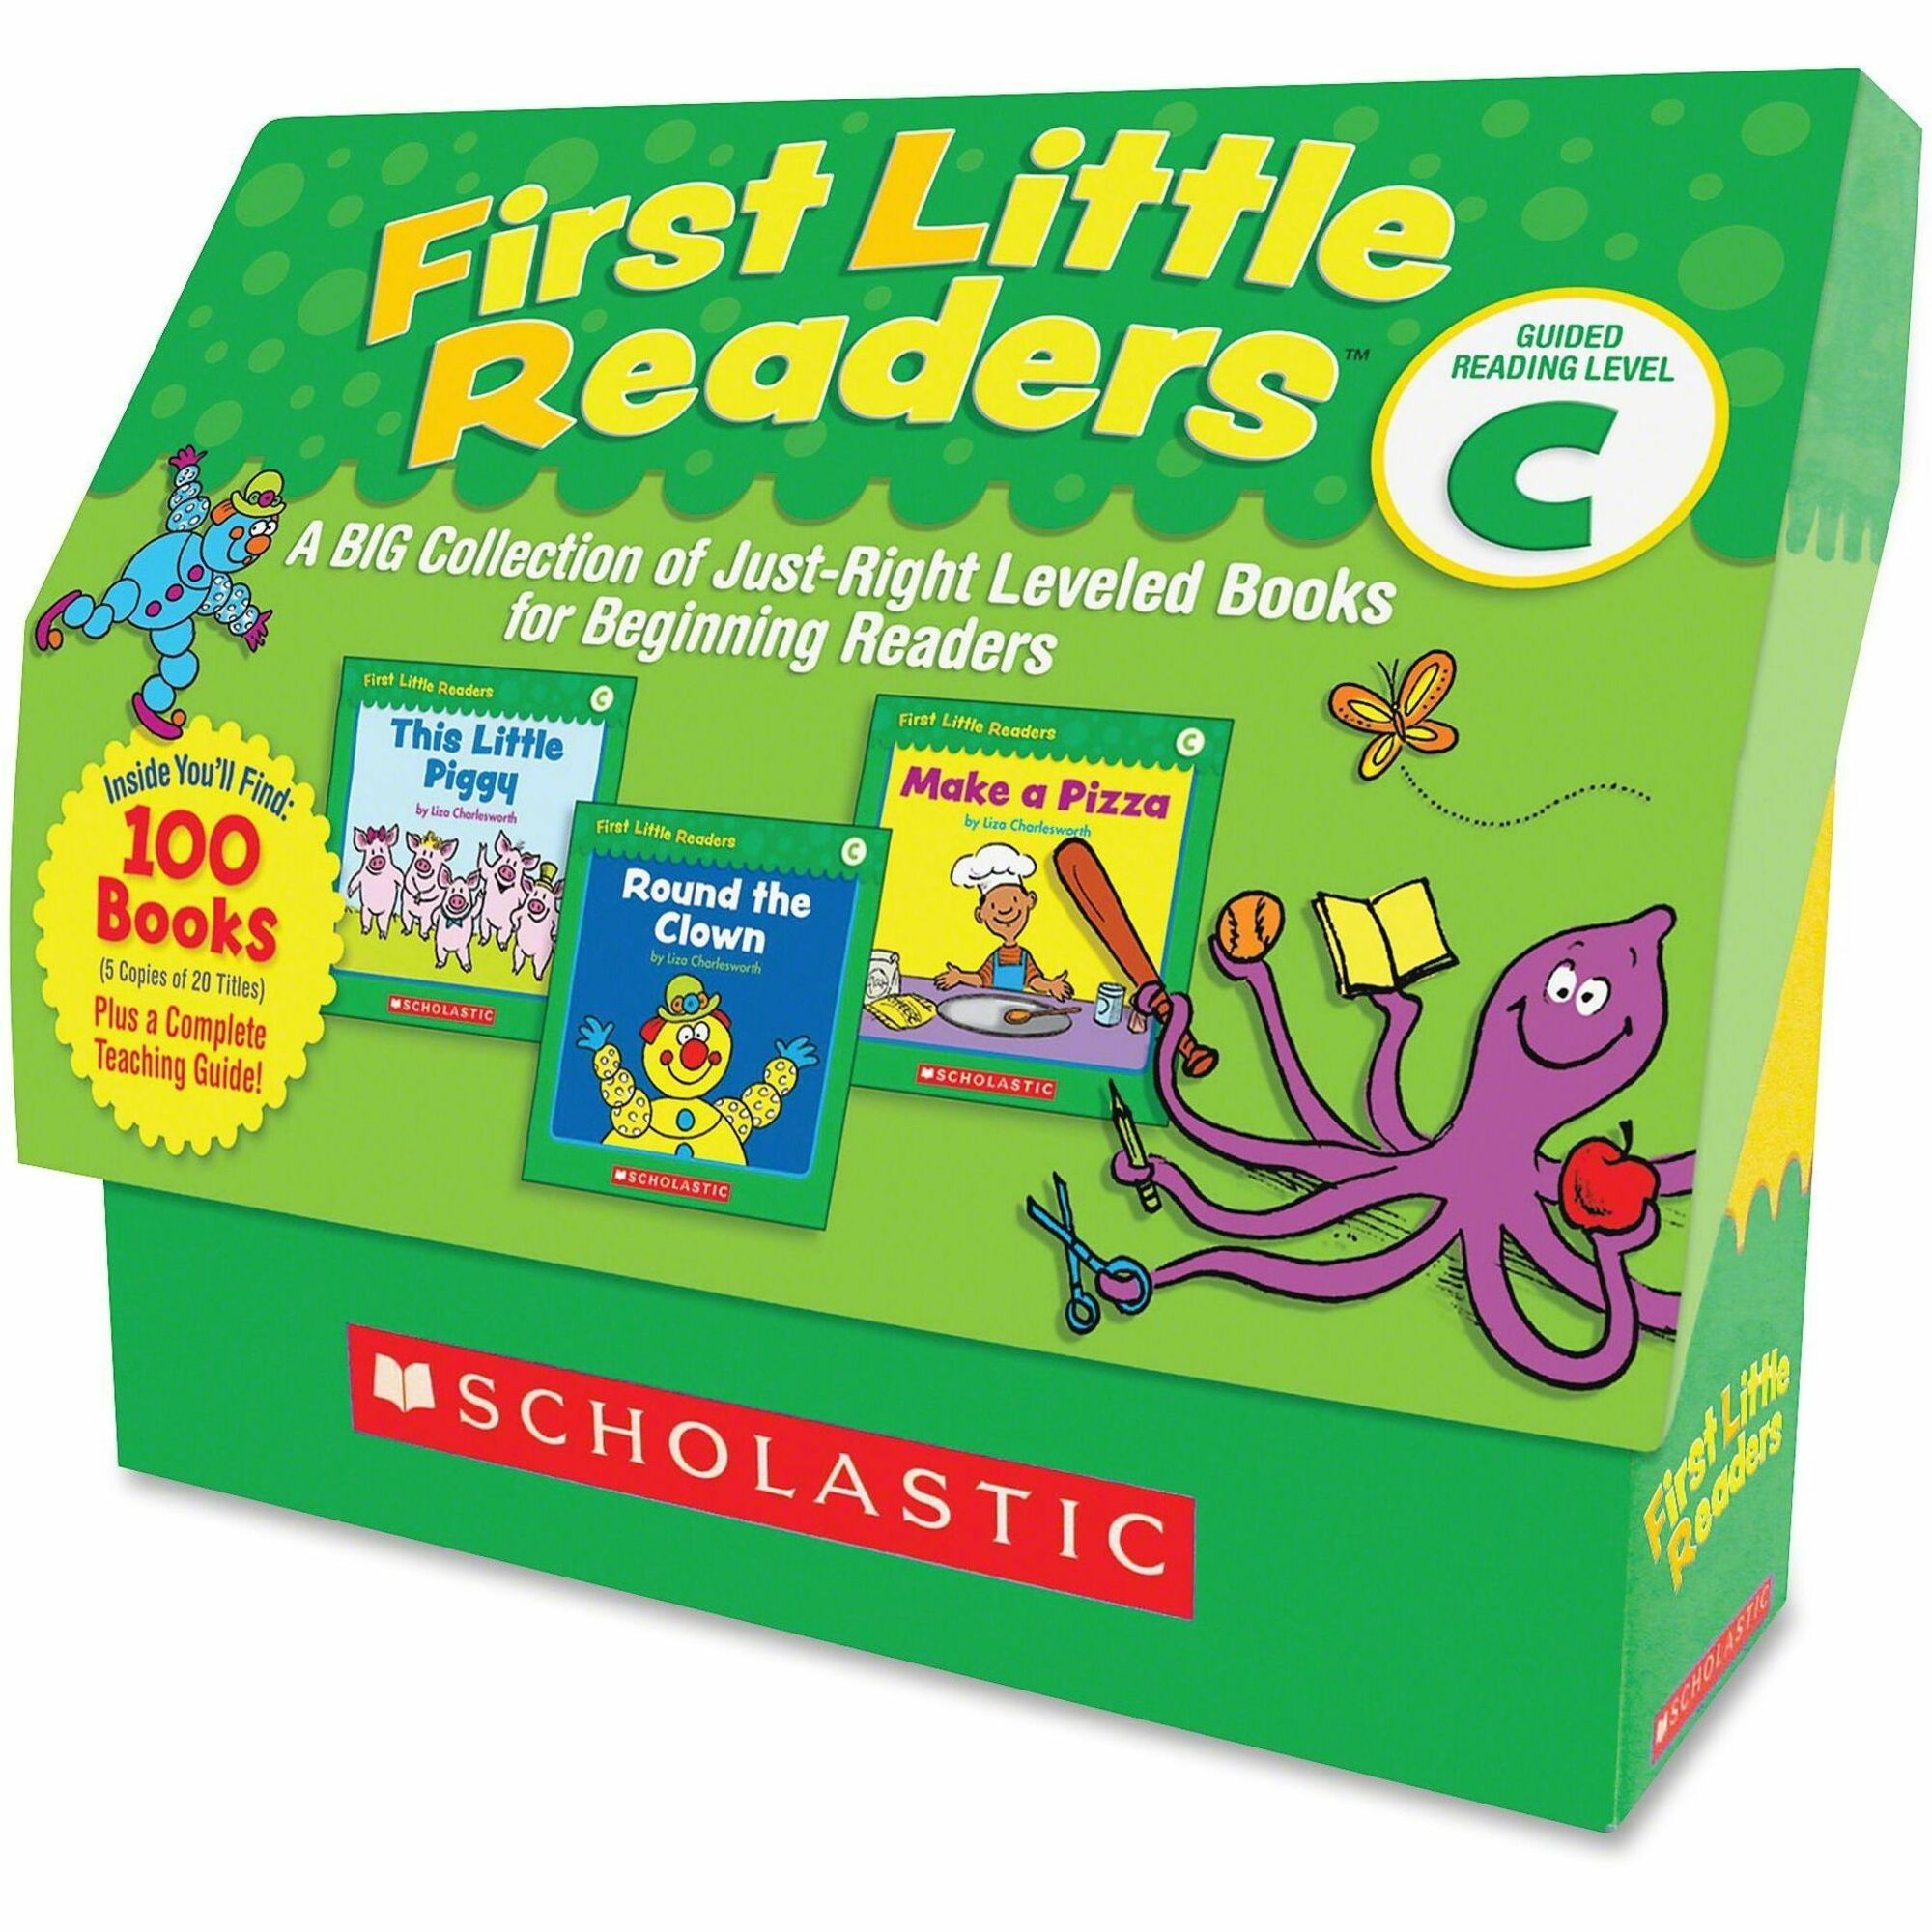 Scholastic Res. Level C 1st Little Readers Book Set Printed Book by Liza Charlesworth - Scholastic Teaching Resources Publication - 2010 September 01 - Book - Grade Preschool-2 - English - 